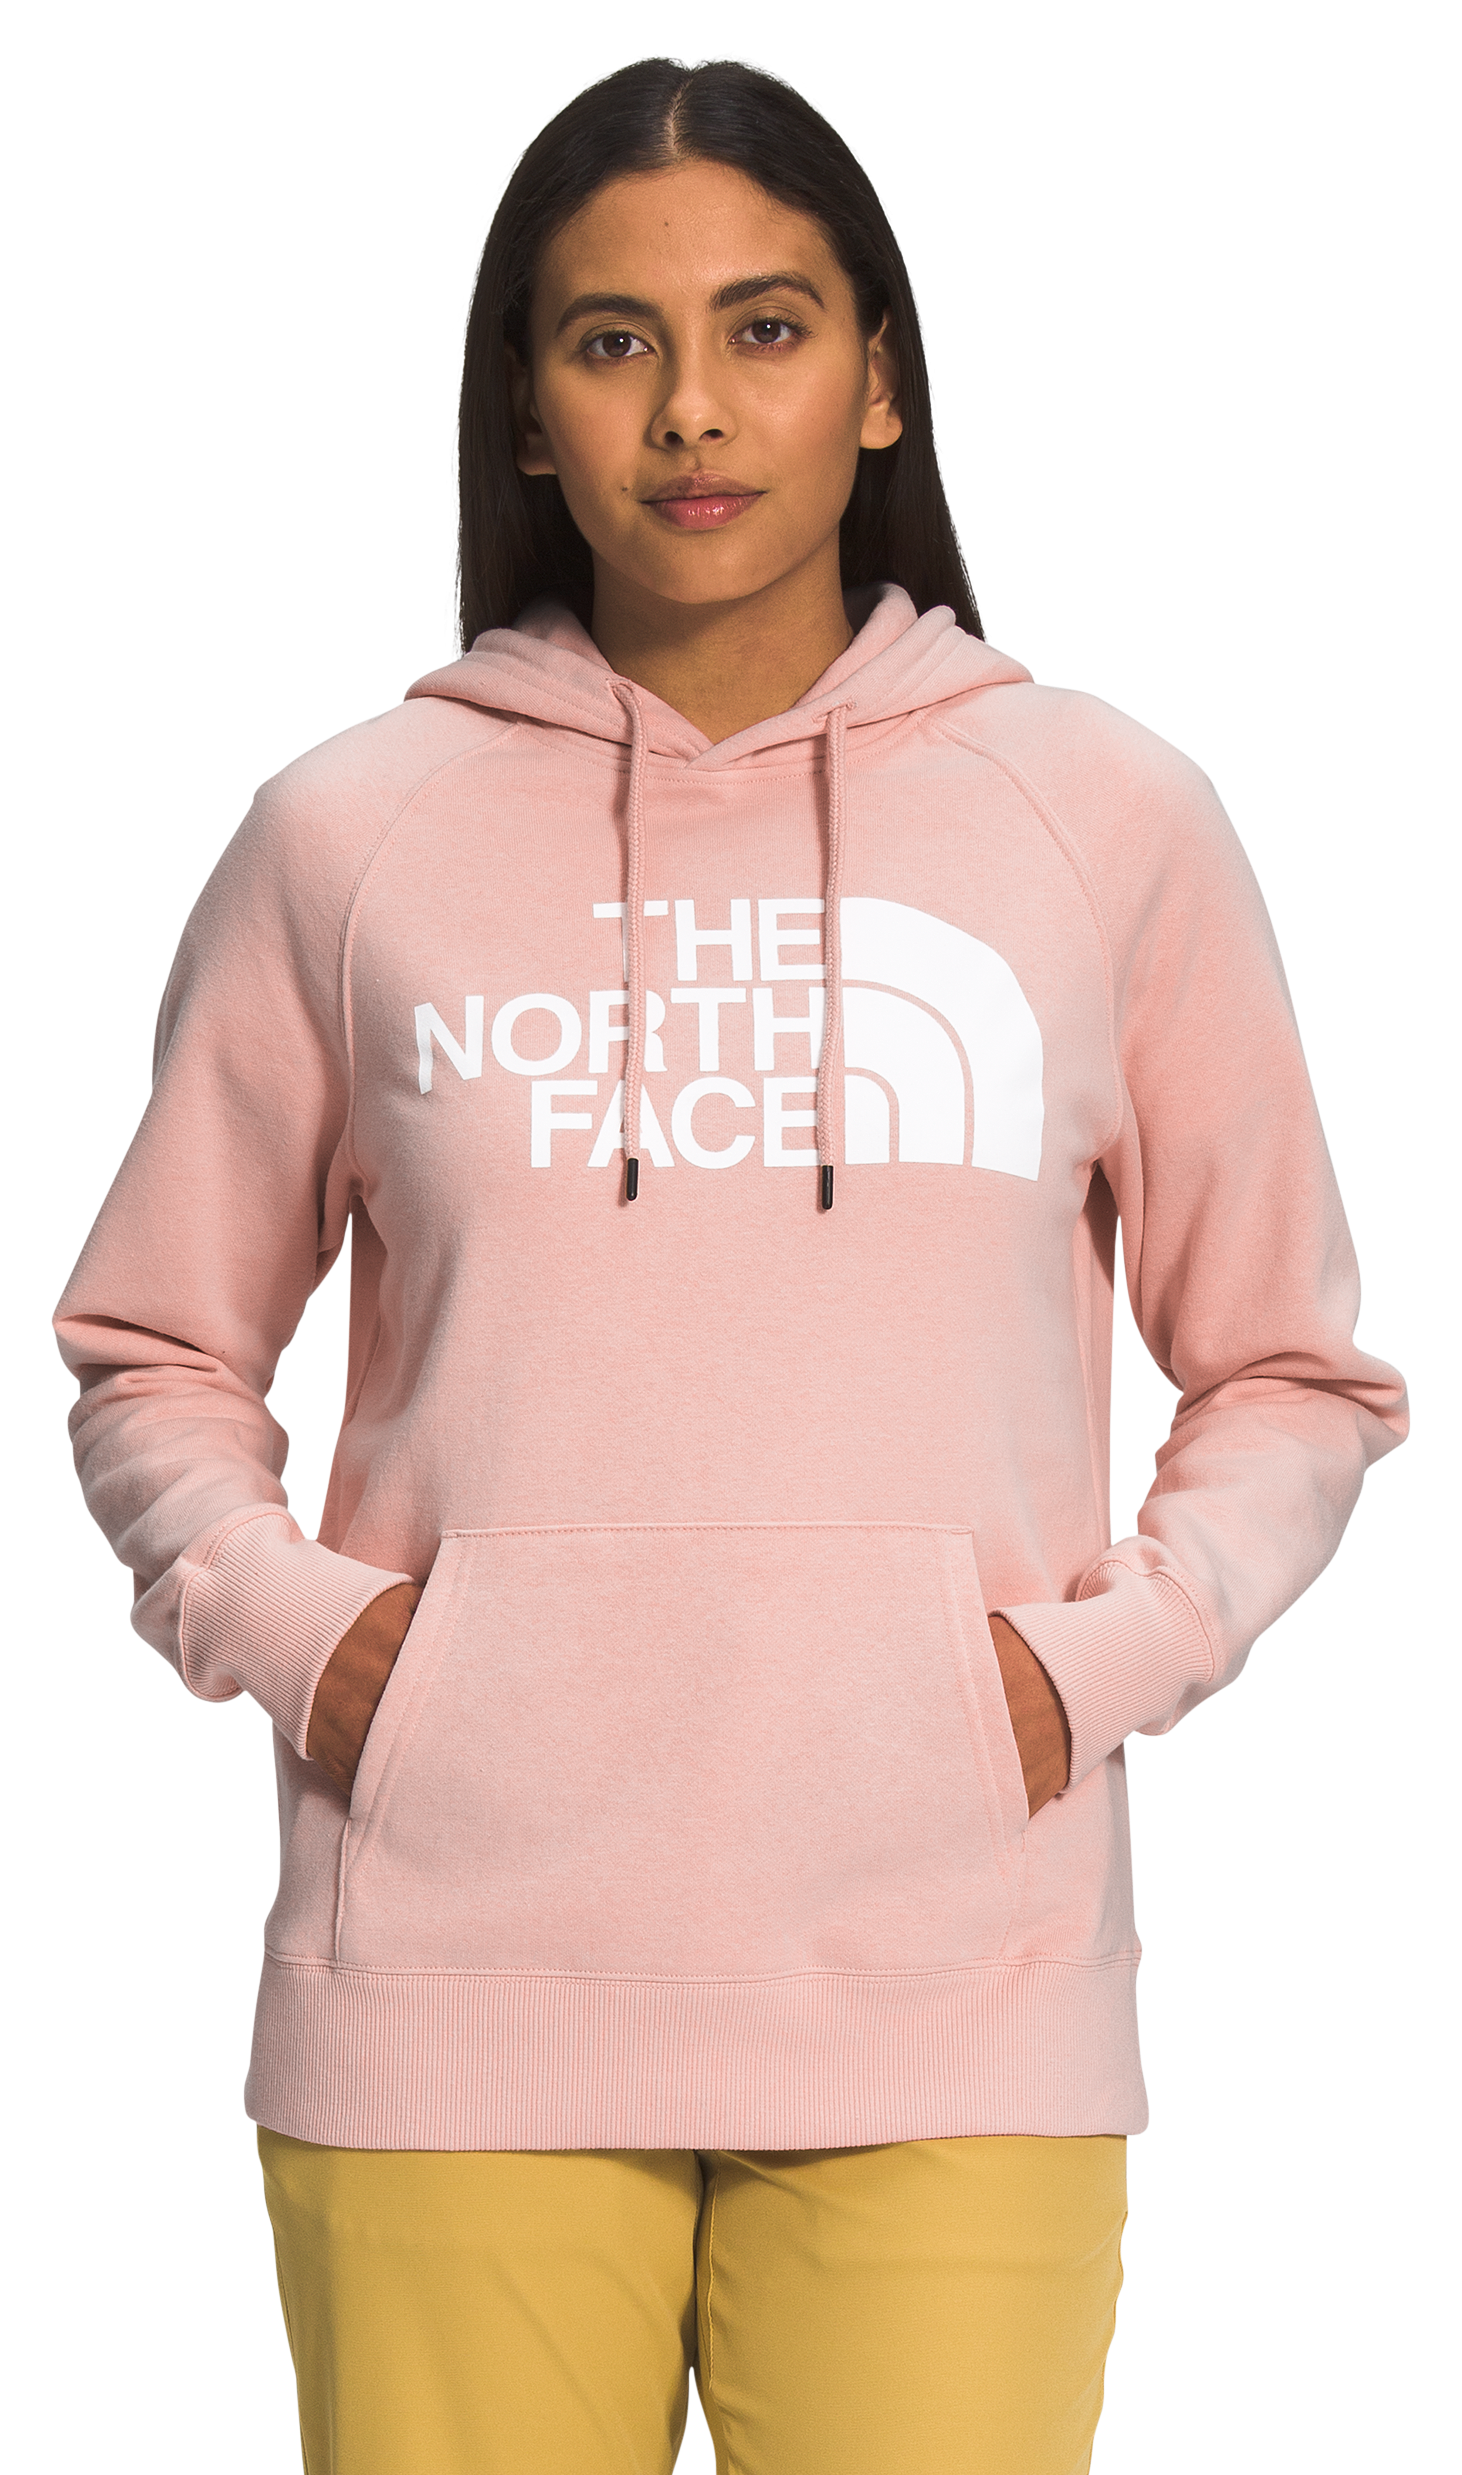 The North Face Half Dome Pullover Long-Sleeve Hoodie for Ladies - Evening Sand Pink/TNF White - XXL